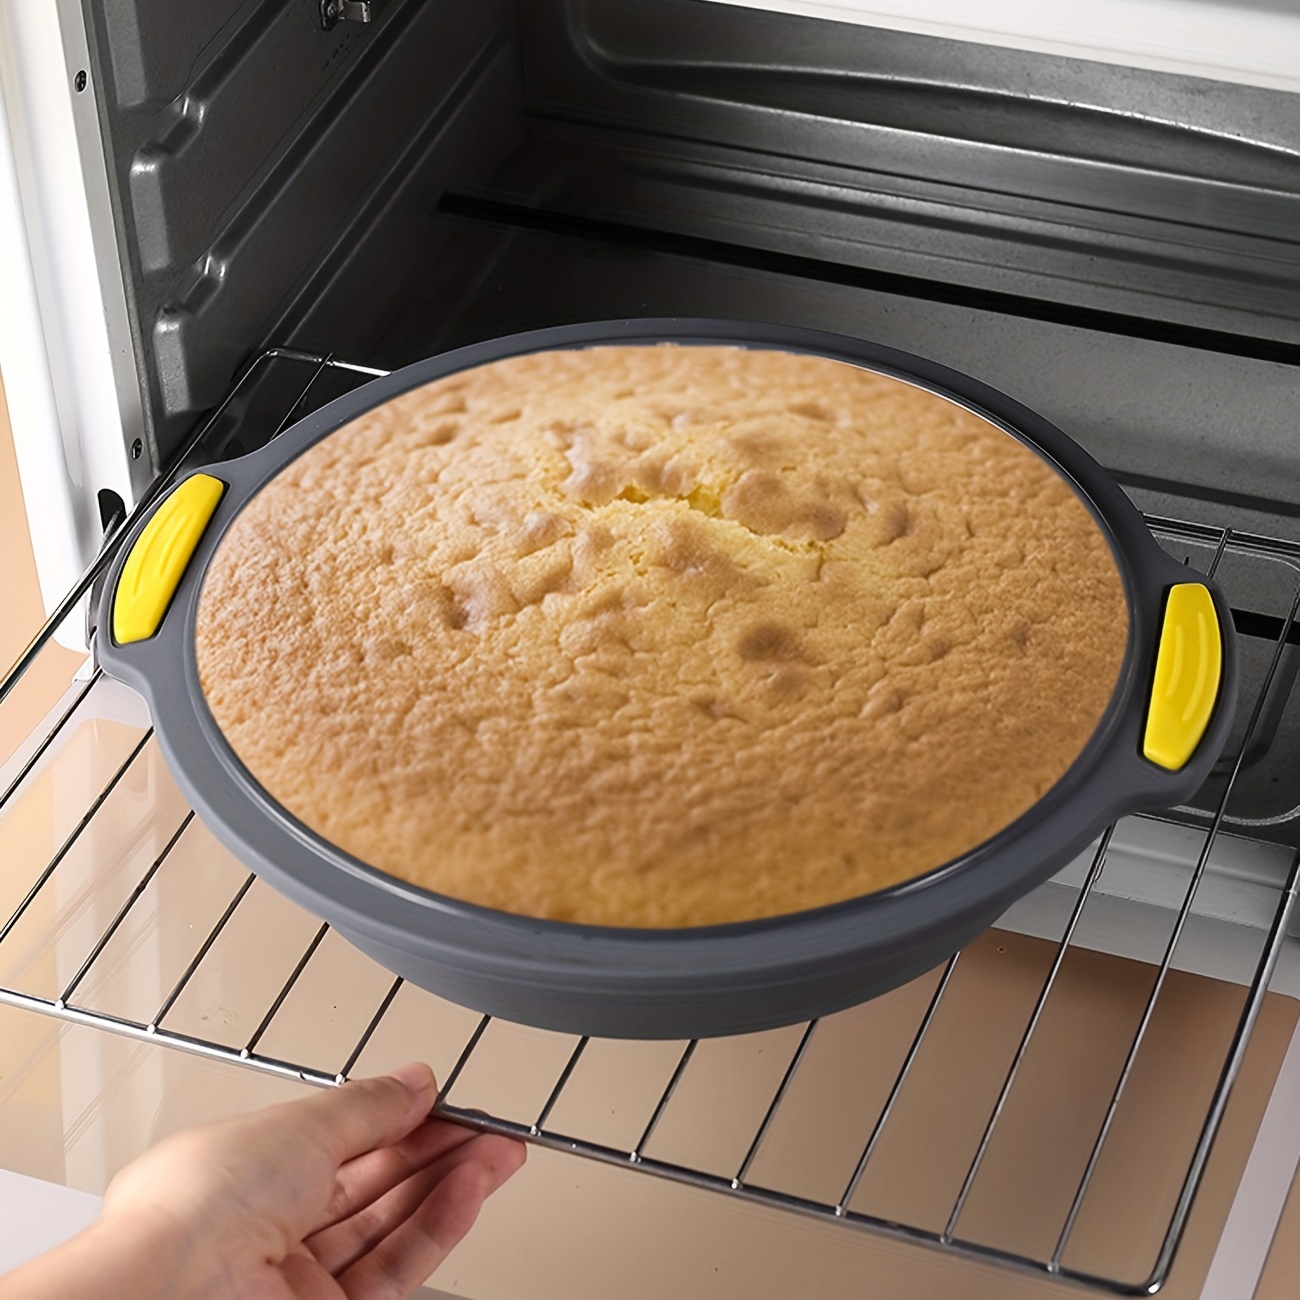 Microwave Oven Oven Easter Silicone Cake Barrel Baking Pan Bread Pan Cake  Mold | eBay